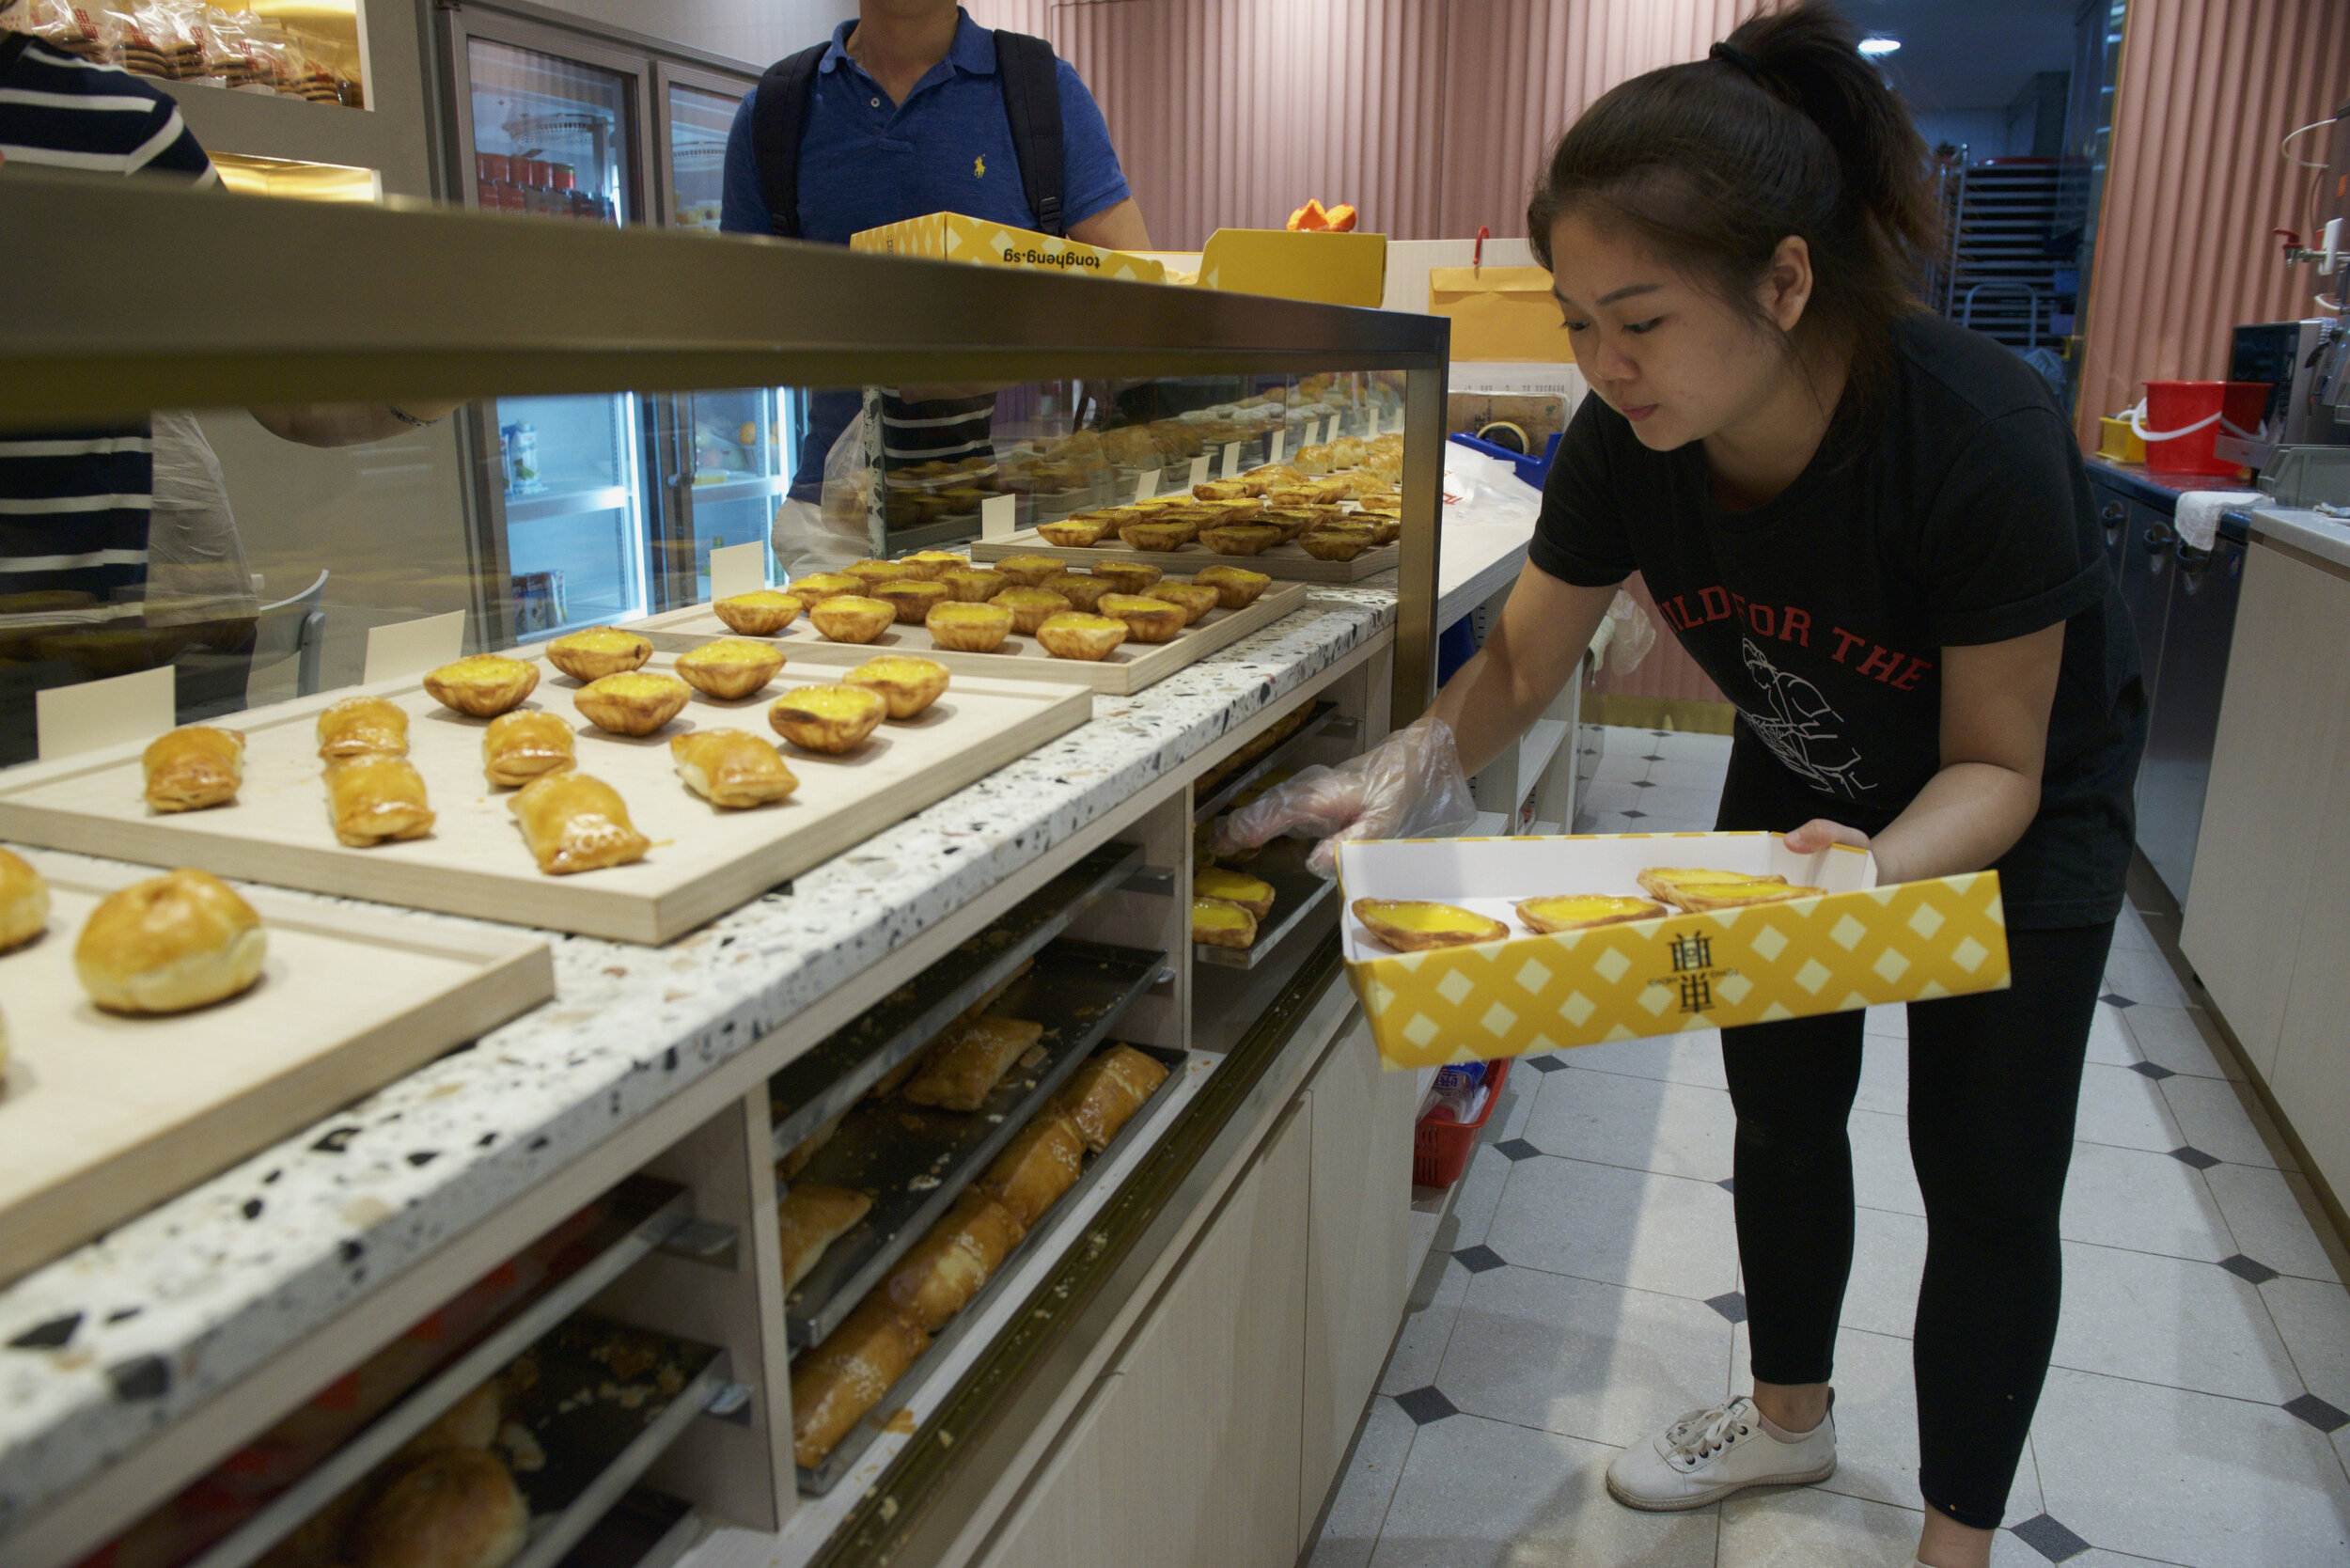  An employee packs a box of egg tarts for takeaway at traditional Cantonese confectionery Tong Heng in Singapore April 21, 2018. 